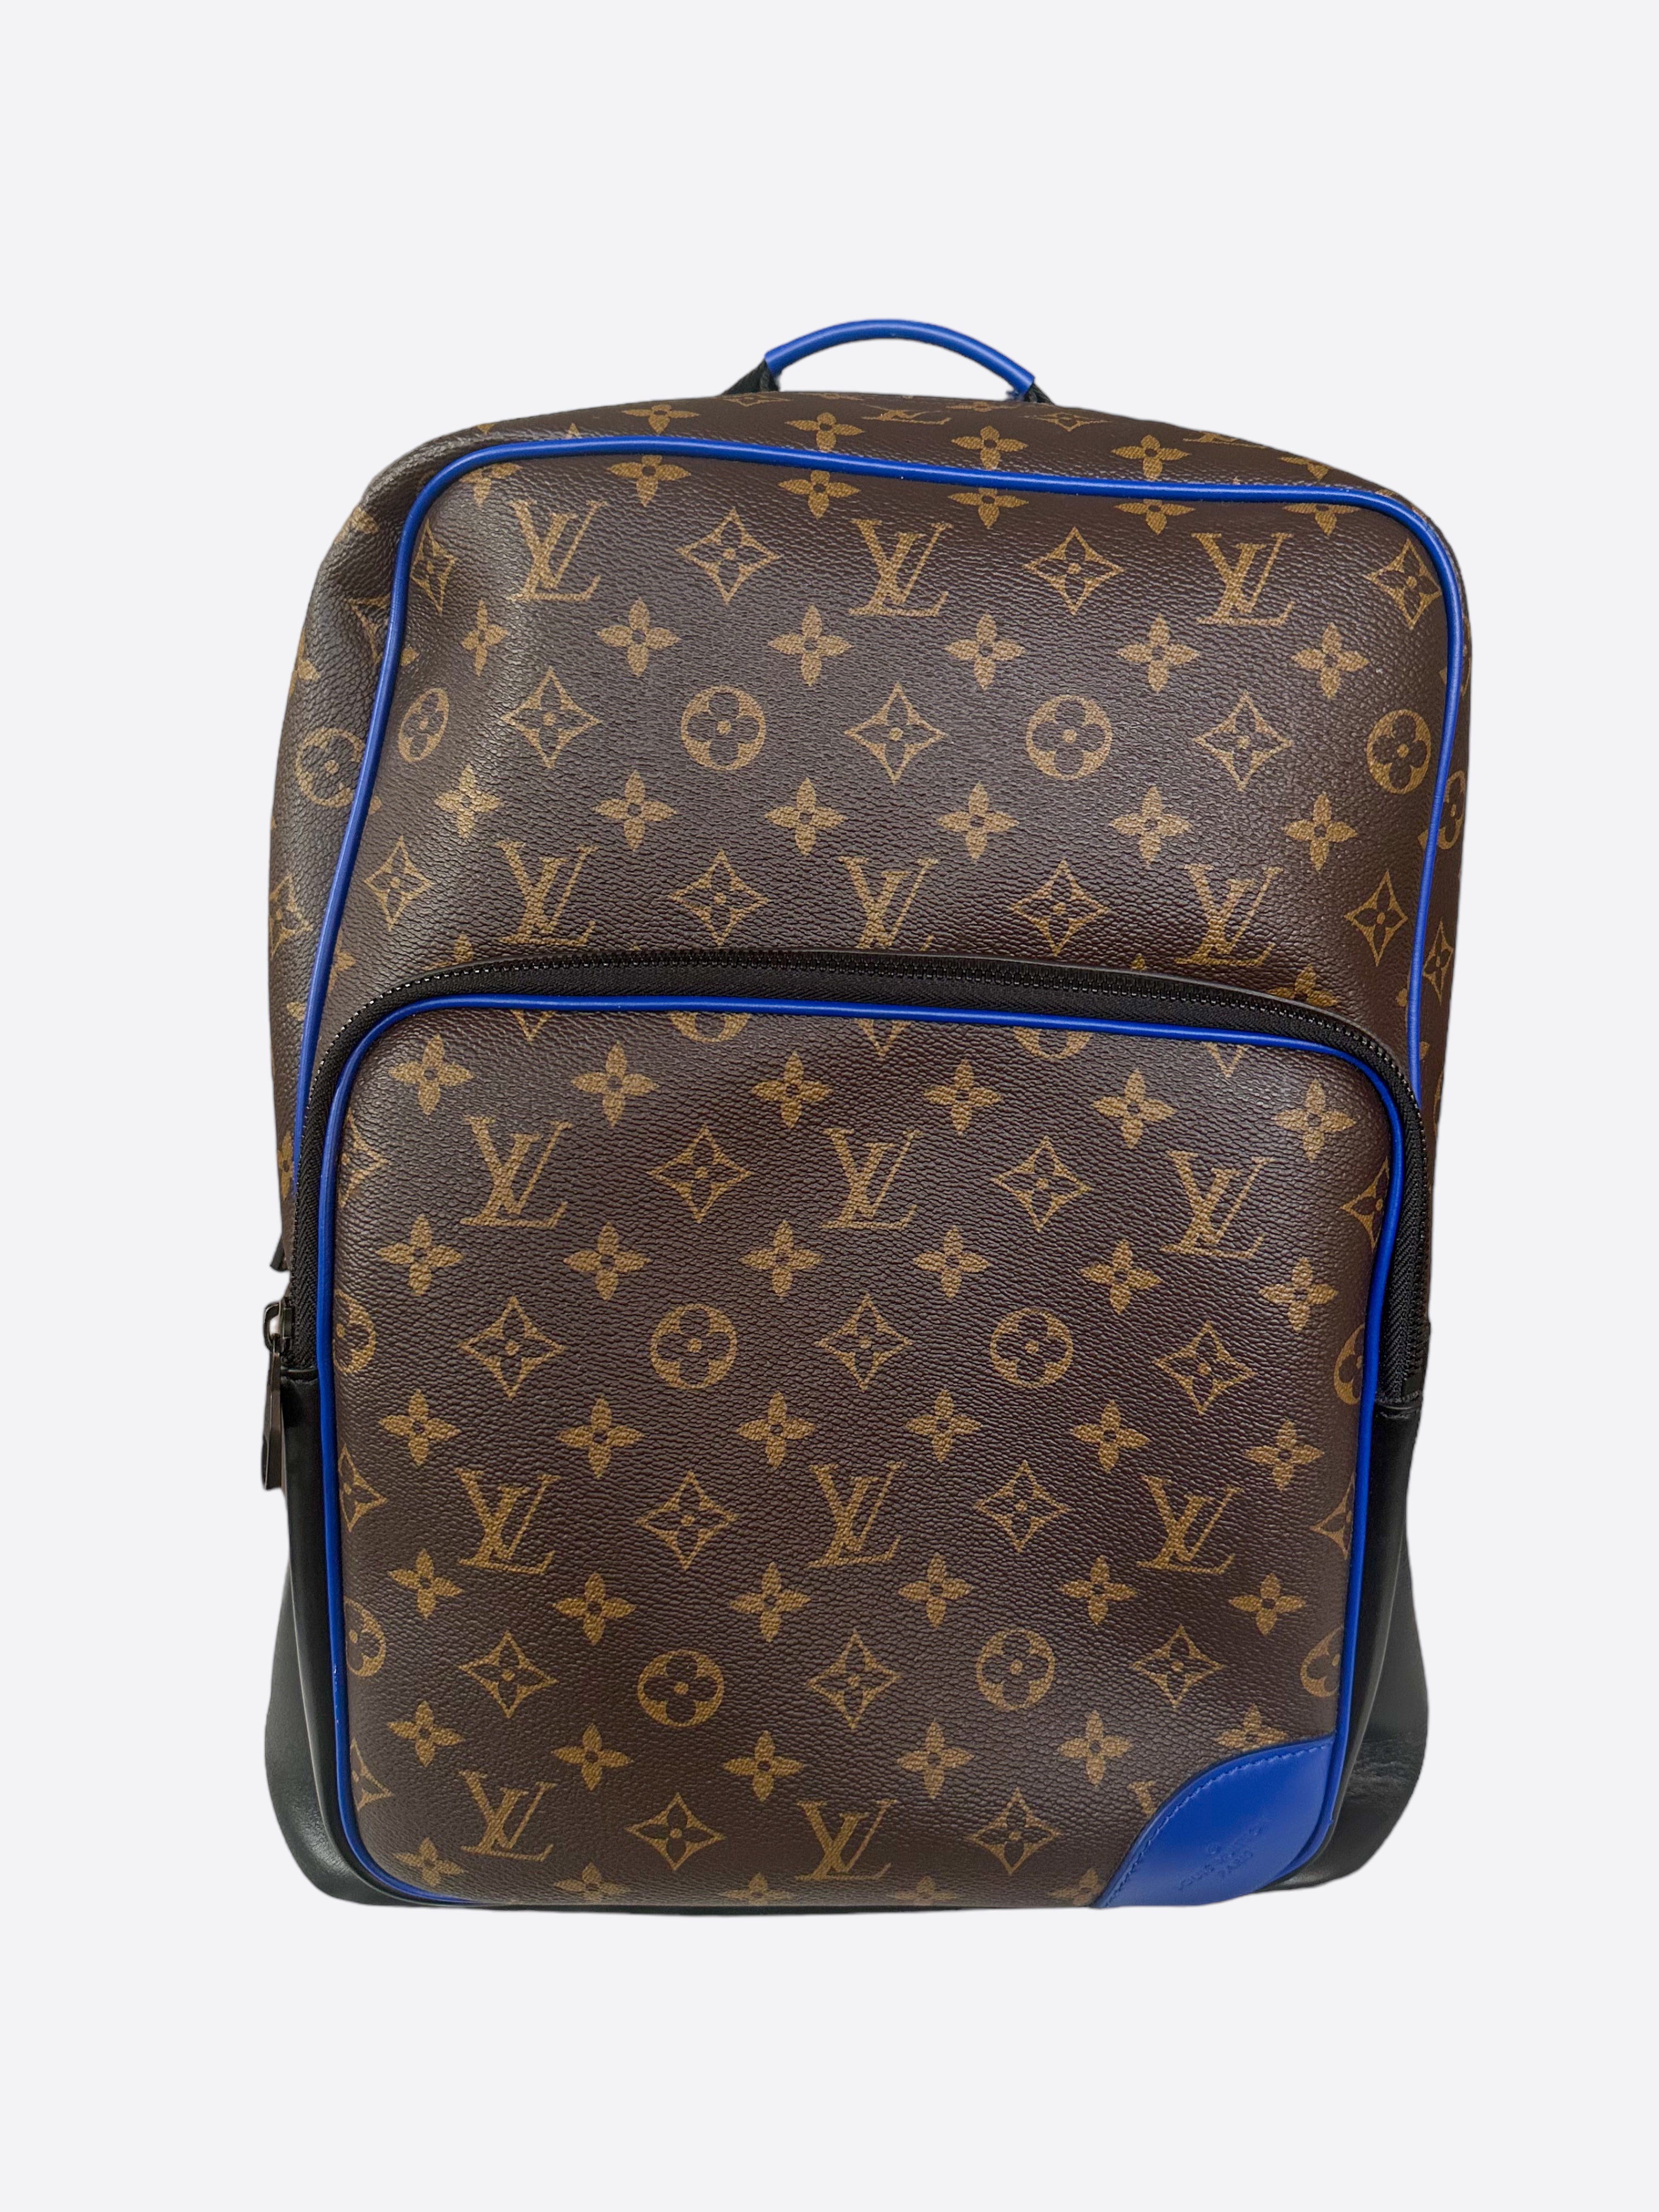  Louis Vuitton M45867 Dean Backpack Brown, BROWN/BLACK/BLUE :  Clothing, Shoes & Jewelry